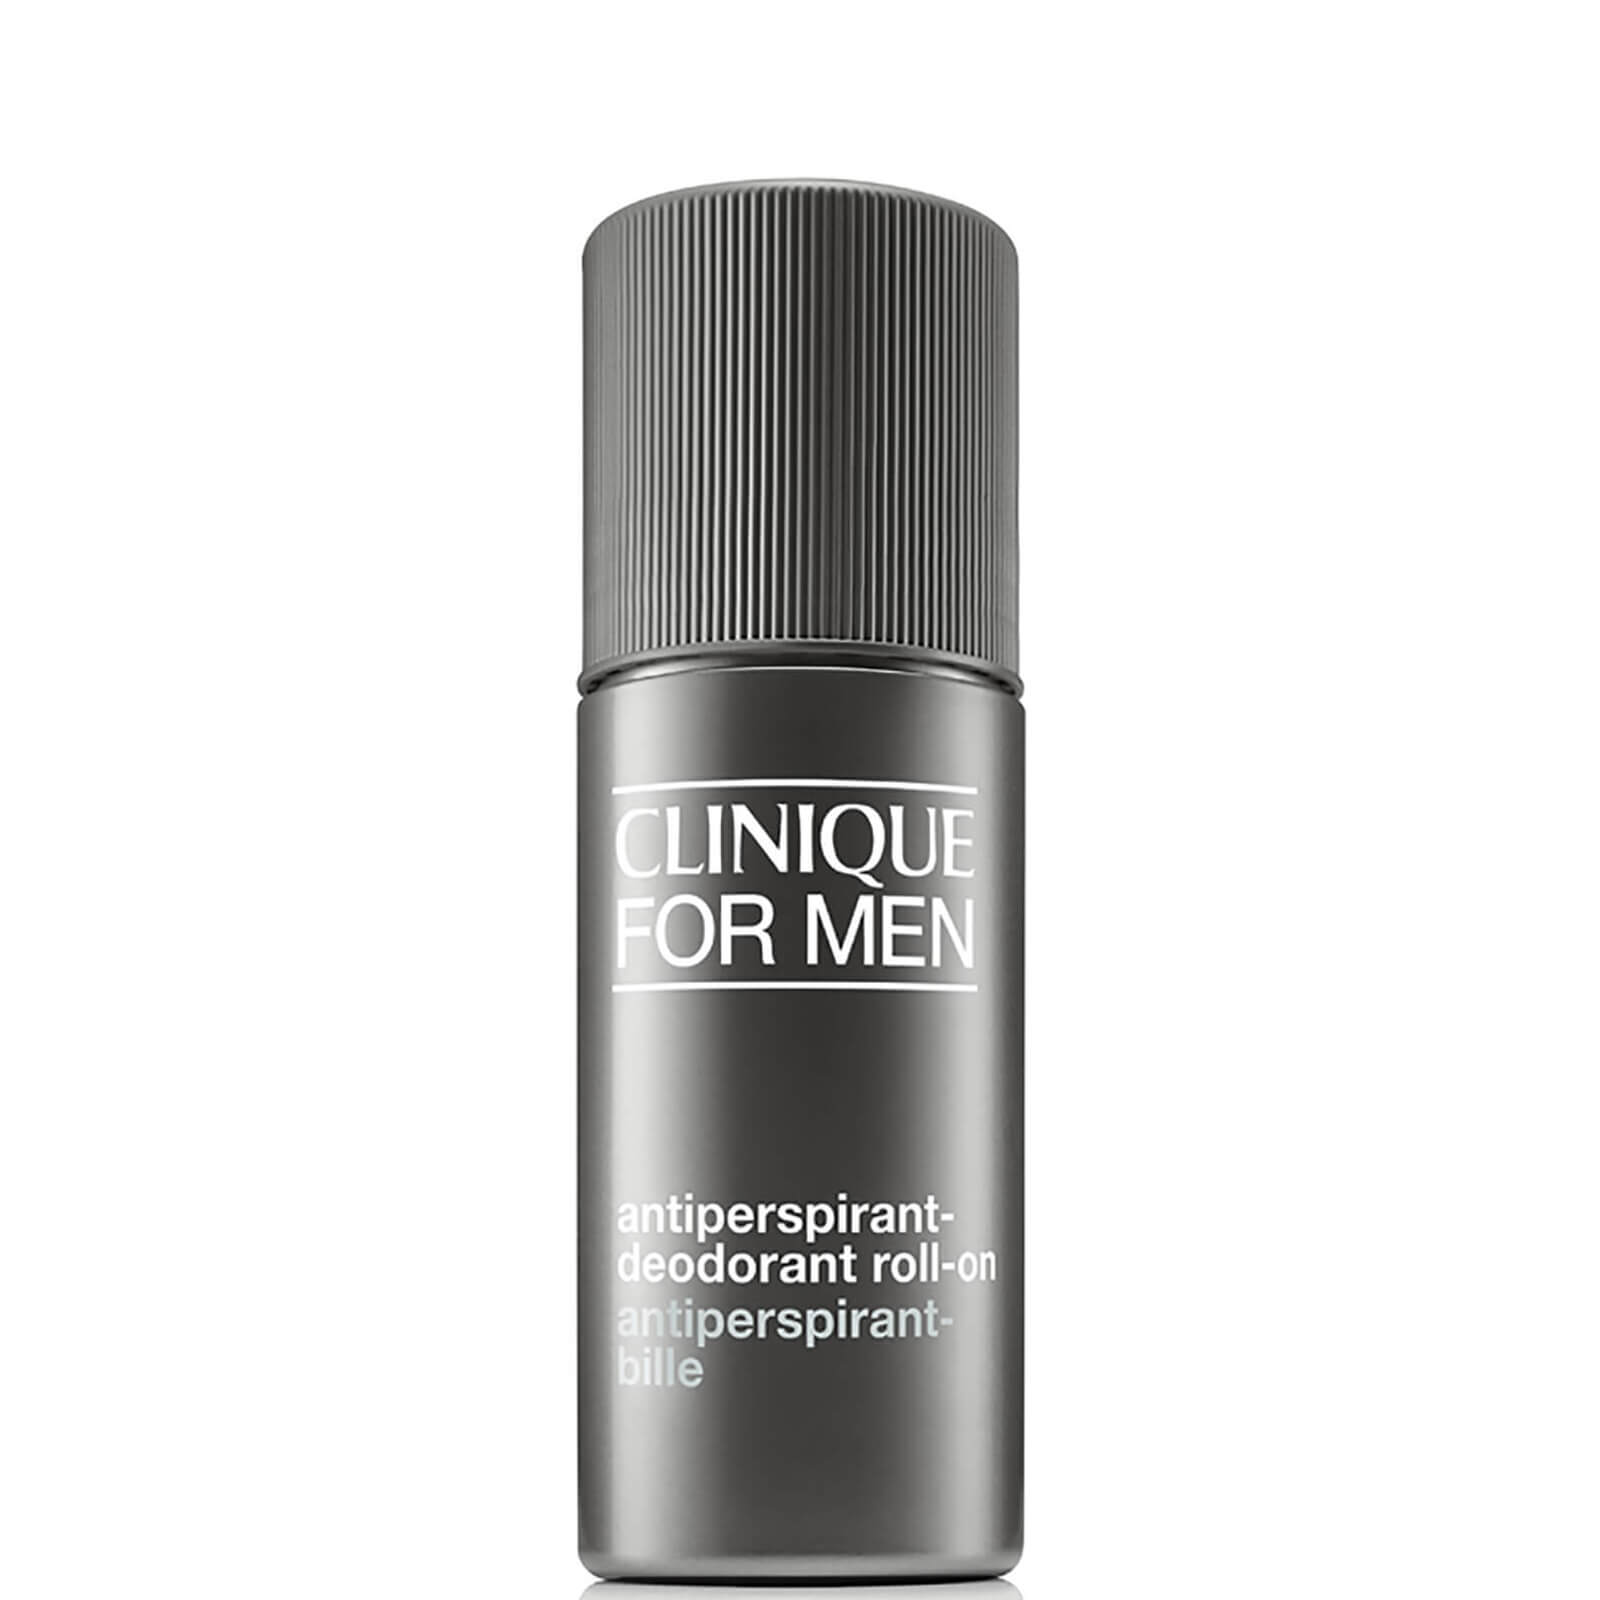 Image of Clinique for Men Anti-Perspirant Deodorant Roll-On 75ml